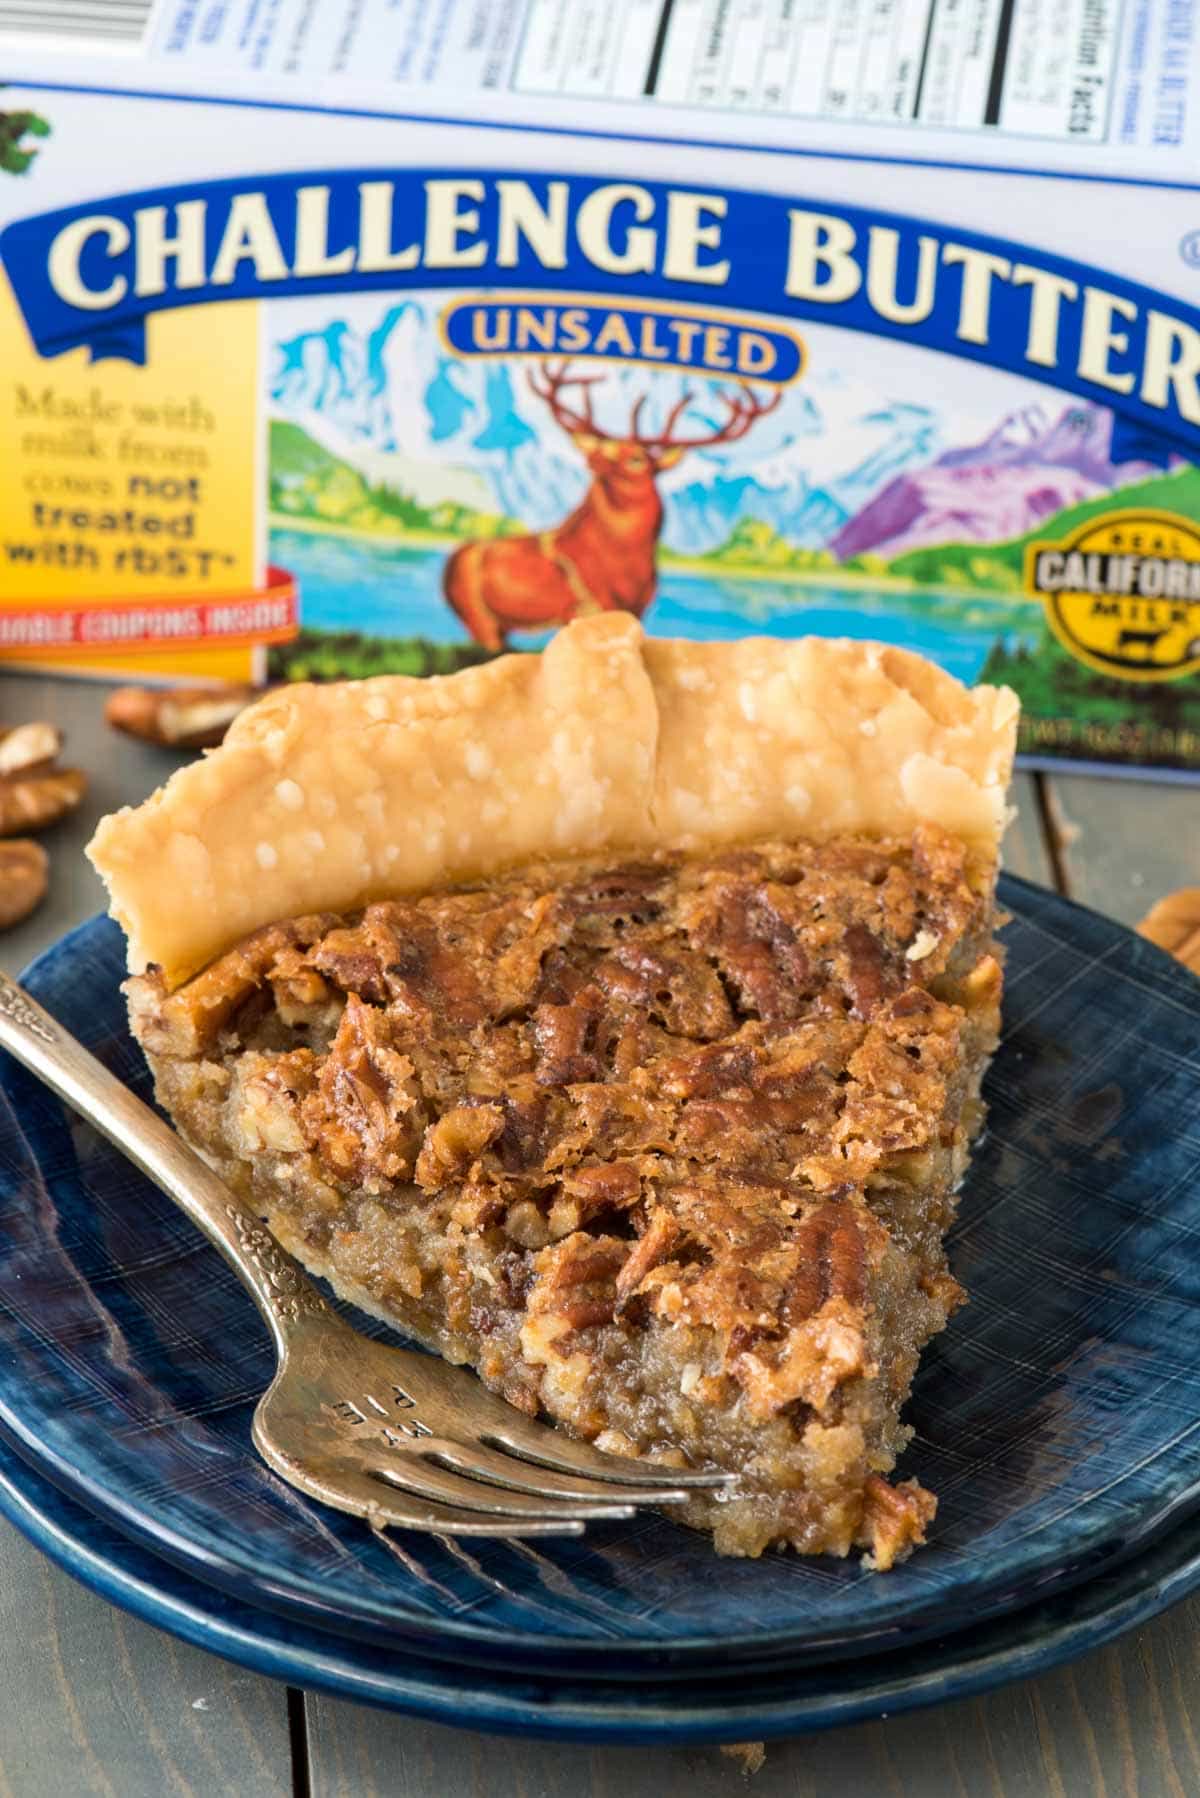 Classic Brown Sugar Pecan Pie Recipe without corn syrup